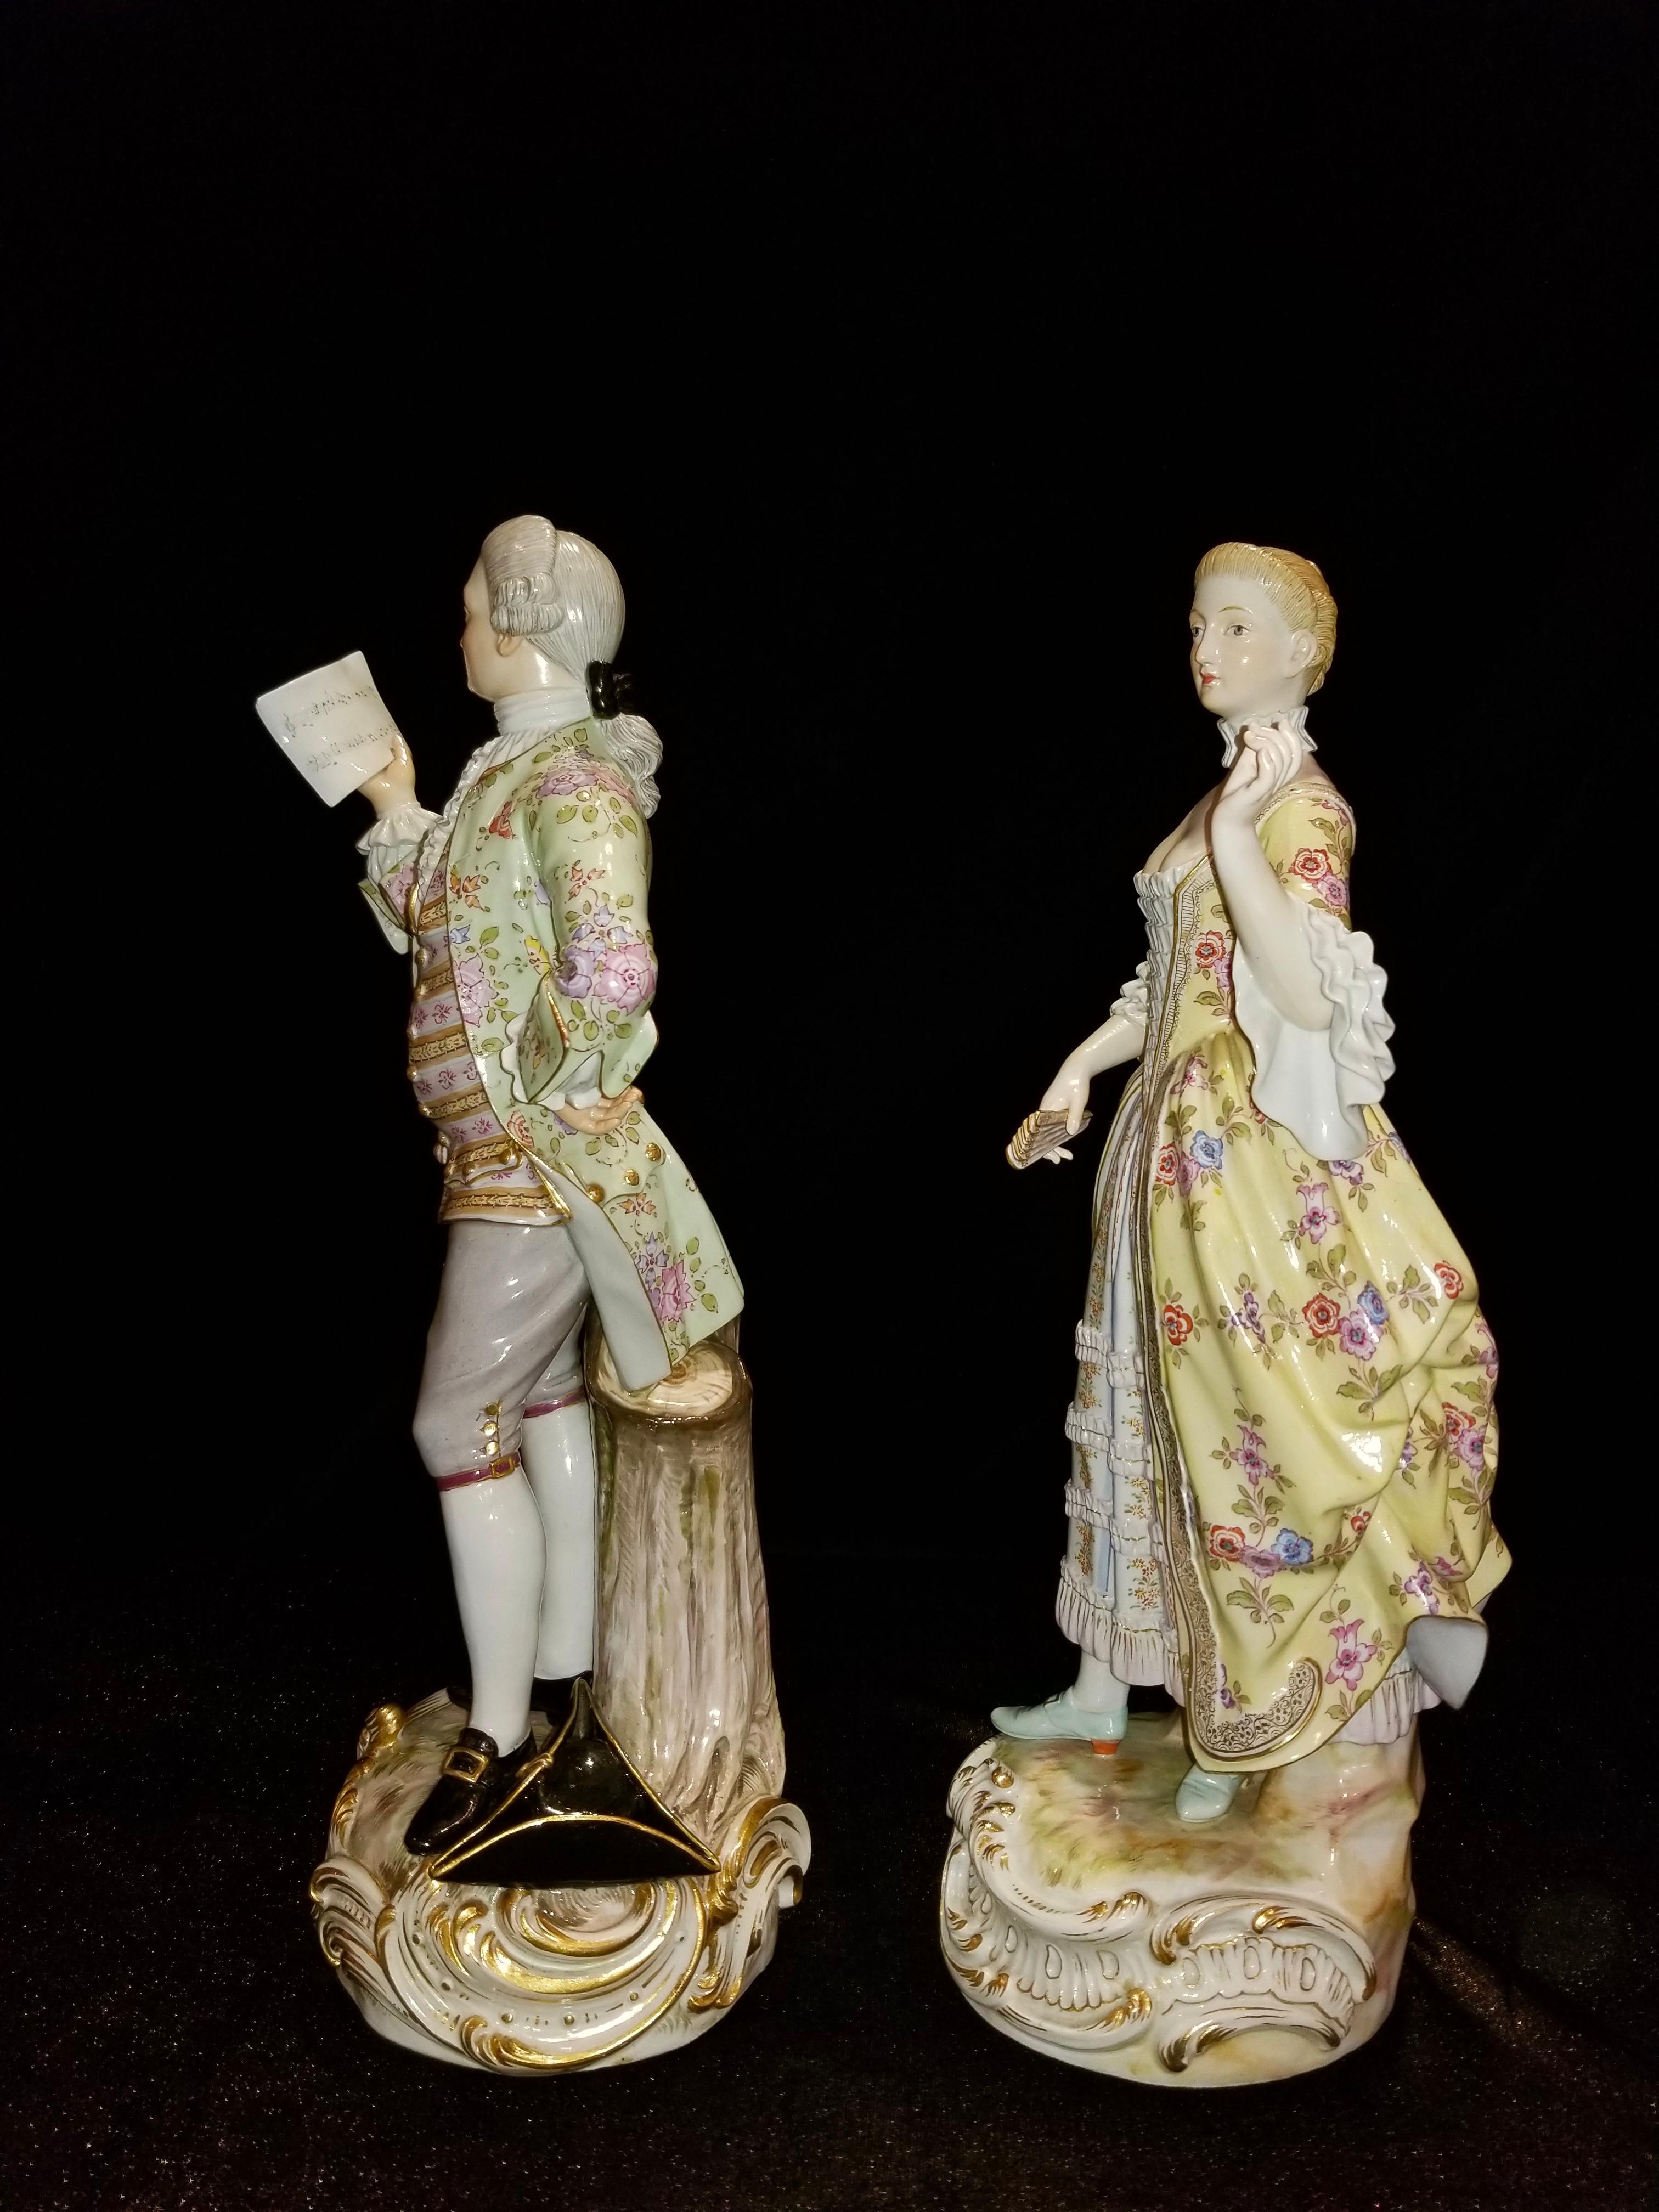 A beautiful and quite large pair of 19th century Meissen porcelain figures of Lovers Singing. Each figure is beautifully decorated and hand-painted. The gentleman is wearing a three-piece suite with a vibrant green jacket decorated with flowers and